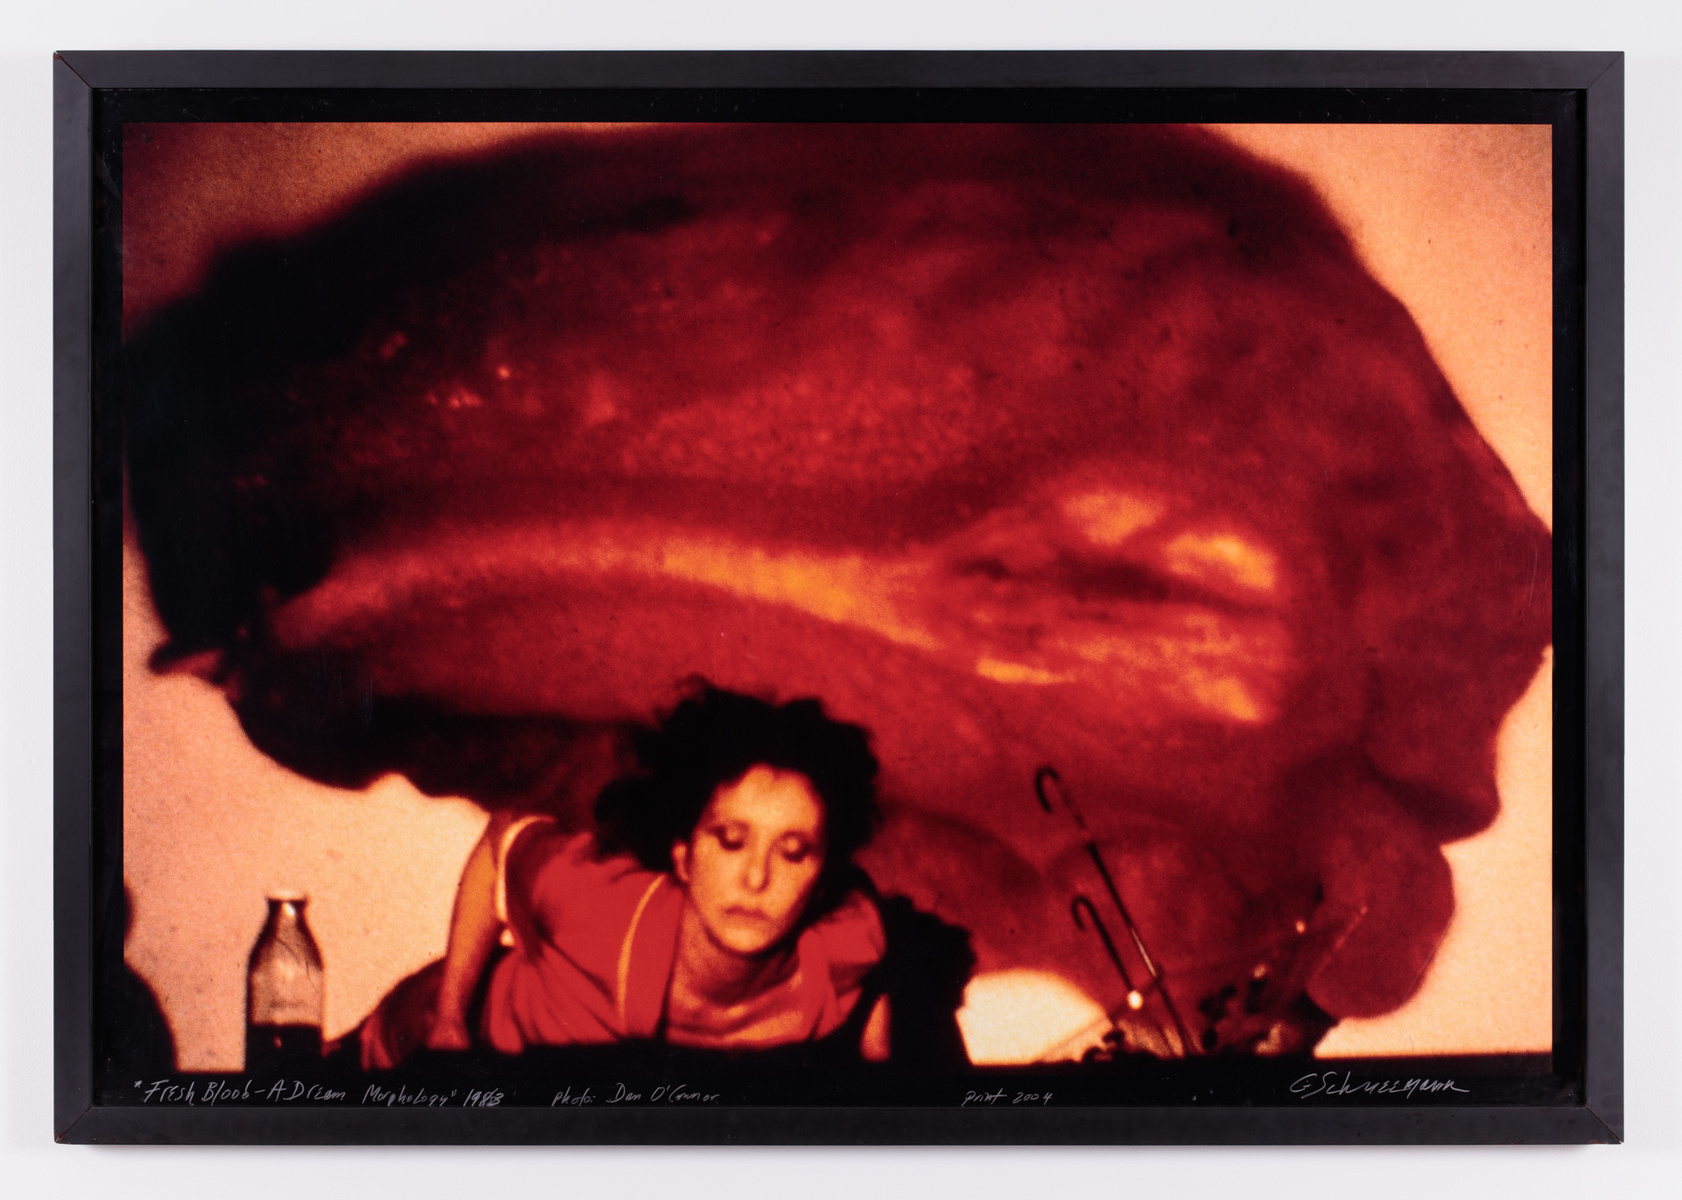 image of the artist laying face down in red with her face extended towards the camera; behind her is a large image of red blood